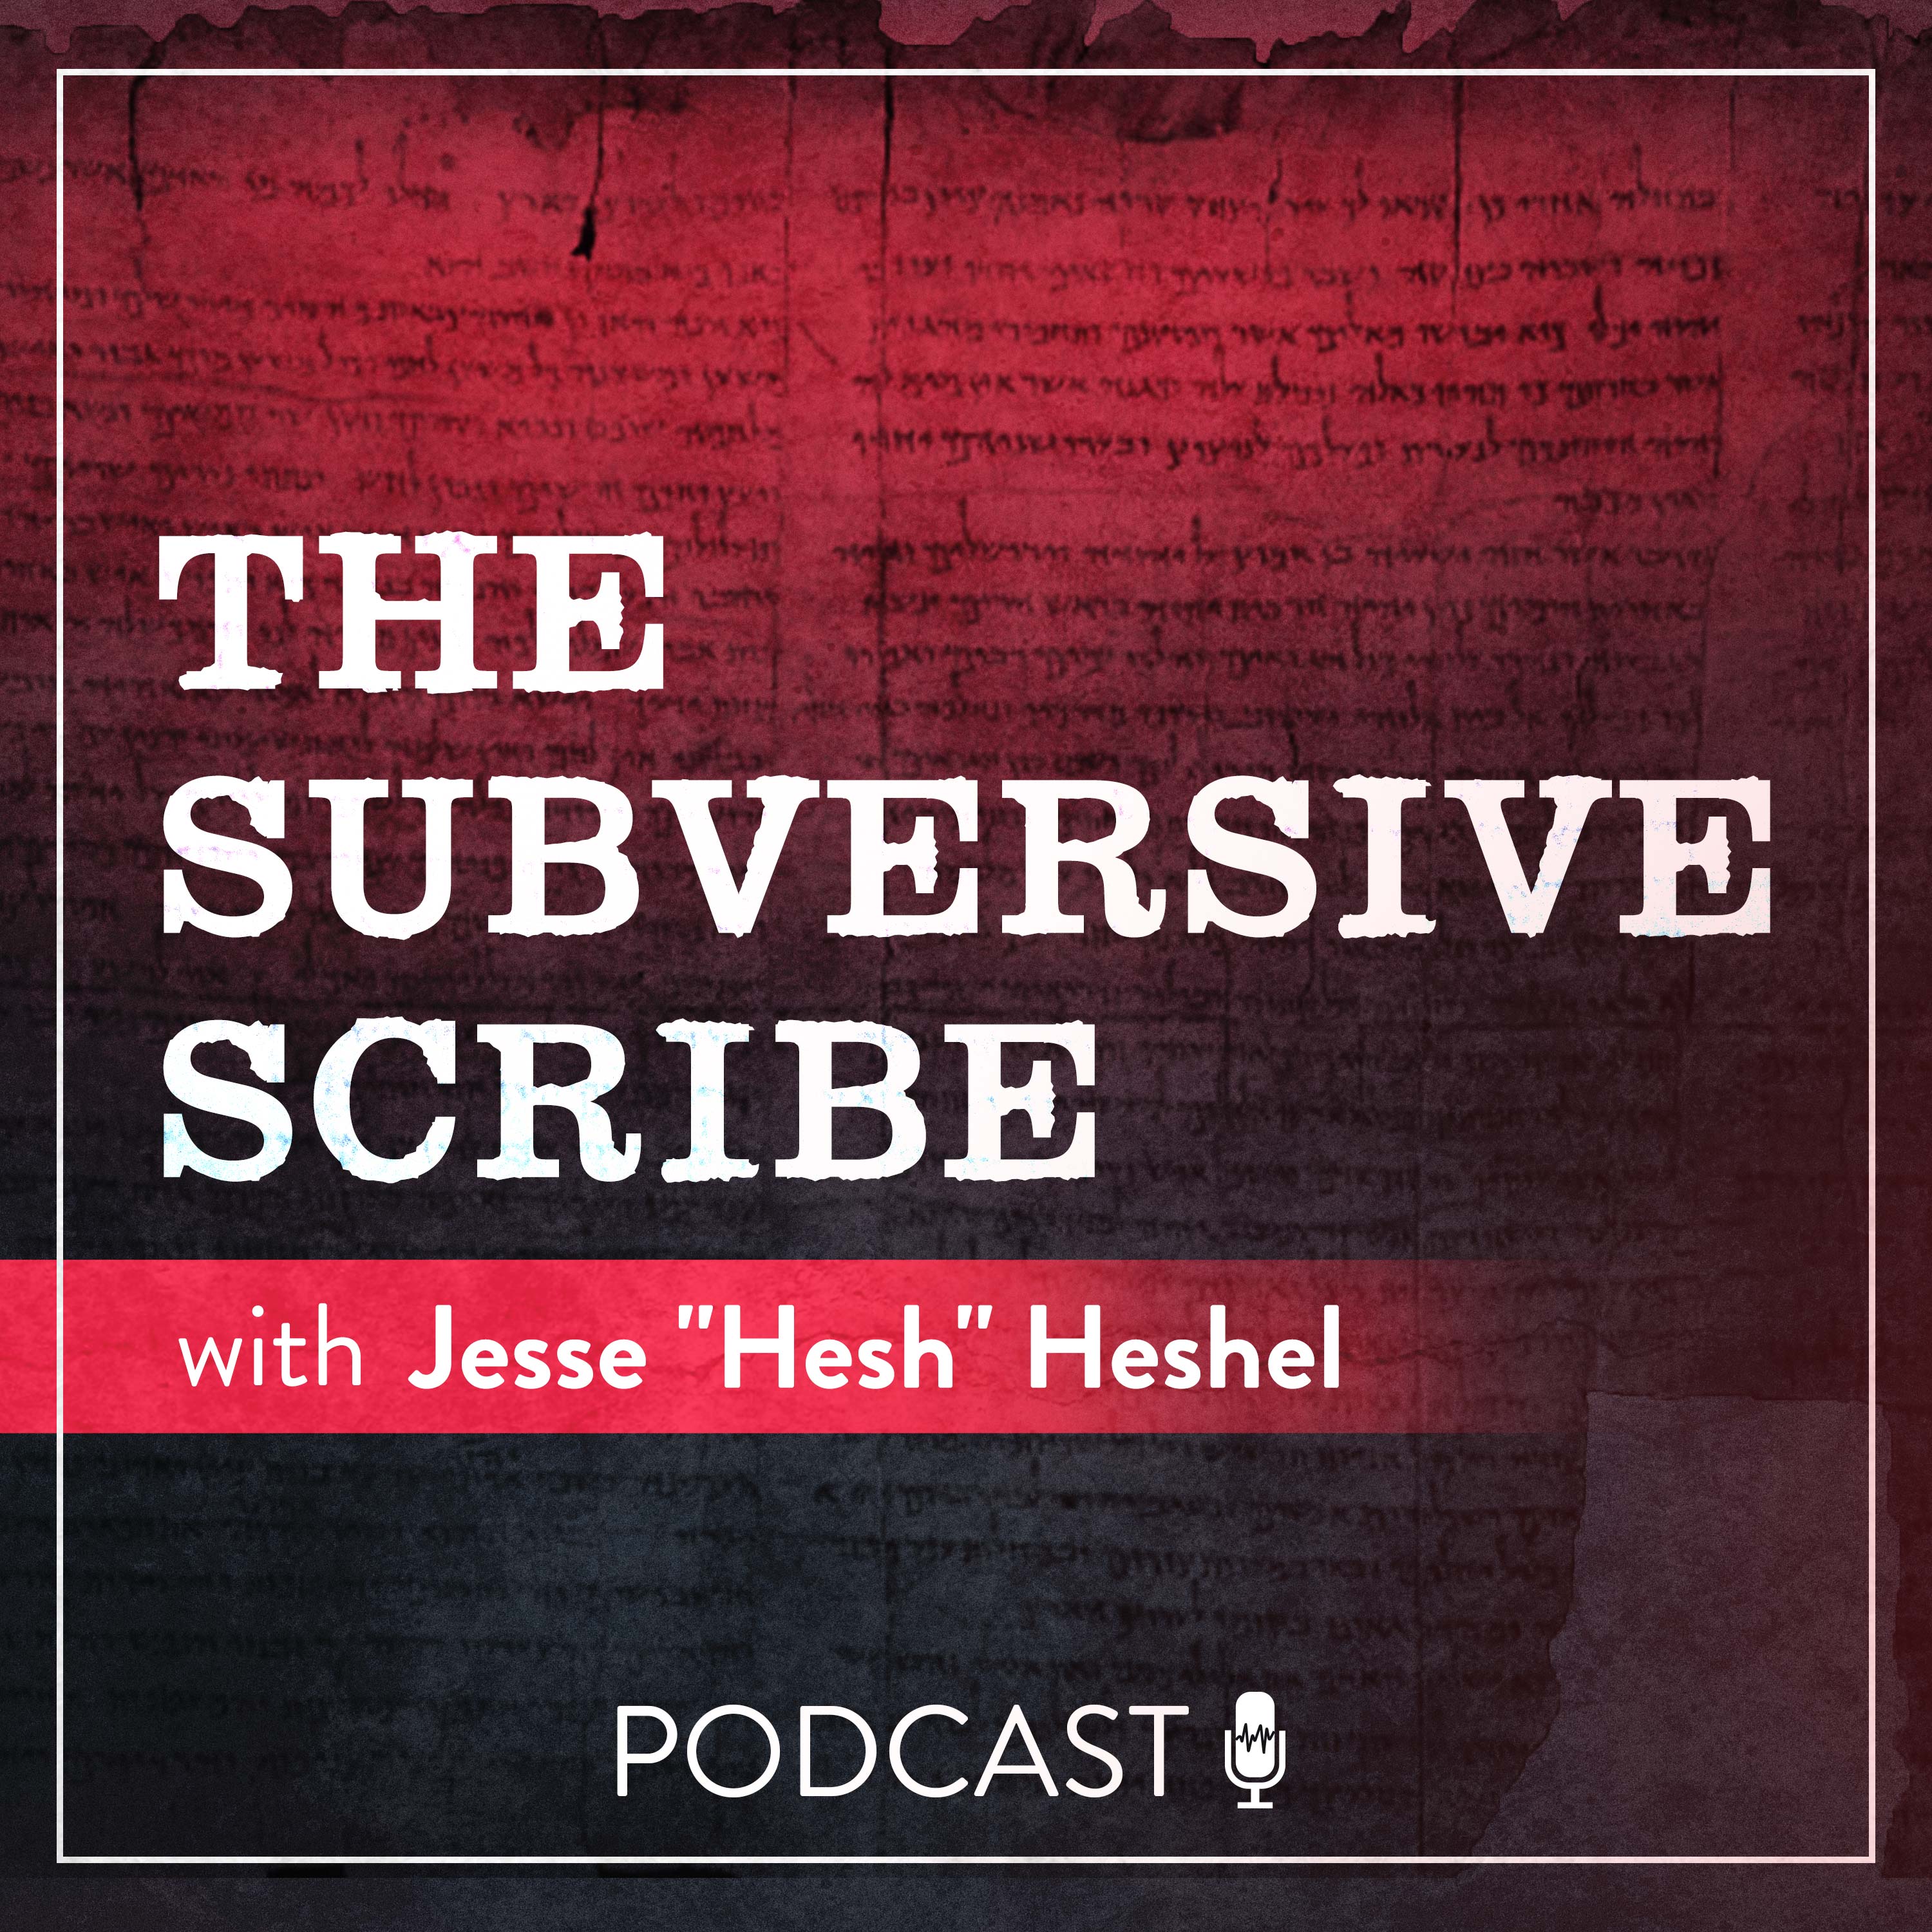 Episode 4 - Straight Is The Way: Peshat Is The Biblicist Meaning